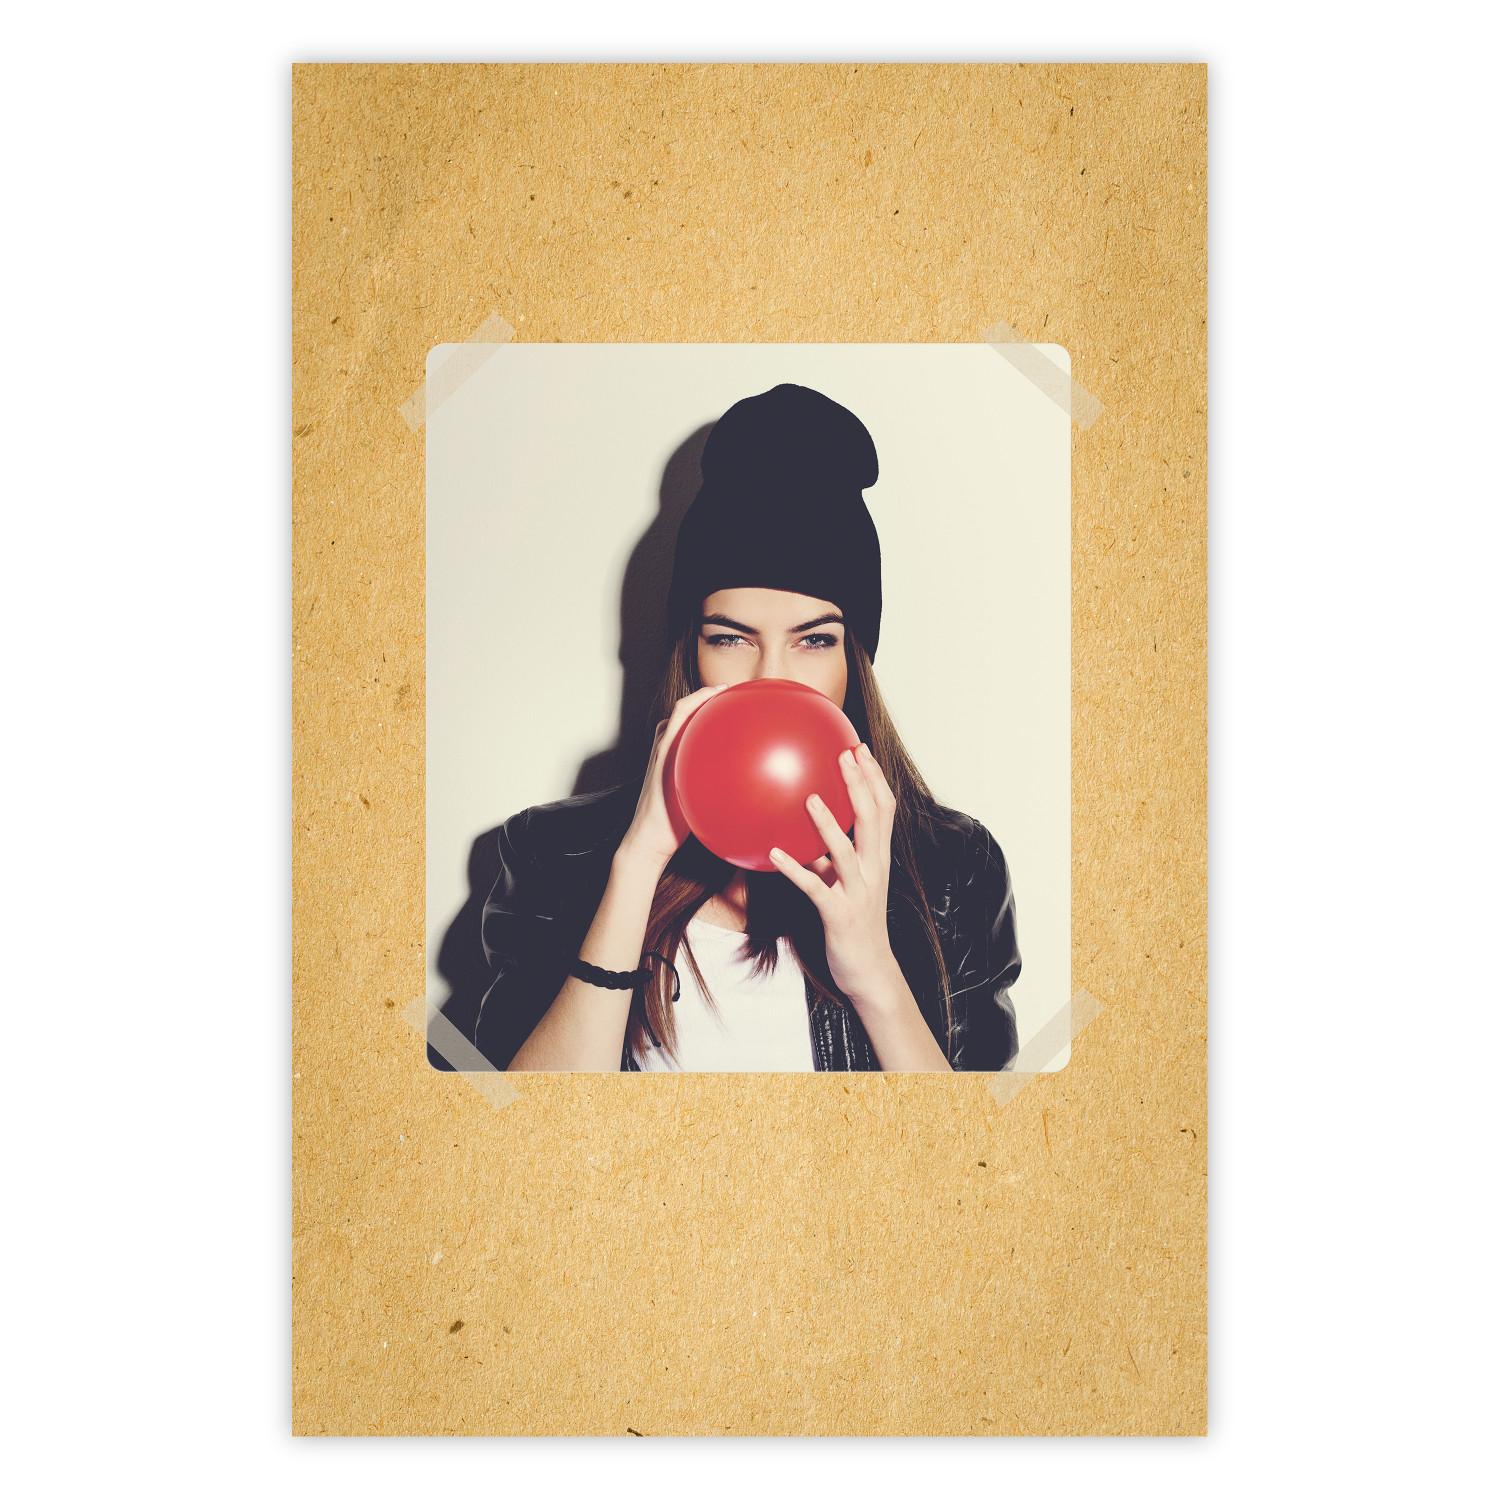 Poster Photo Portrait - figure of a young woman blowing a balloon against a cardboard background